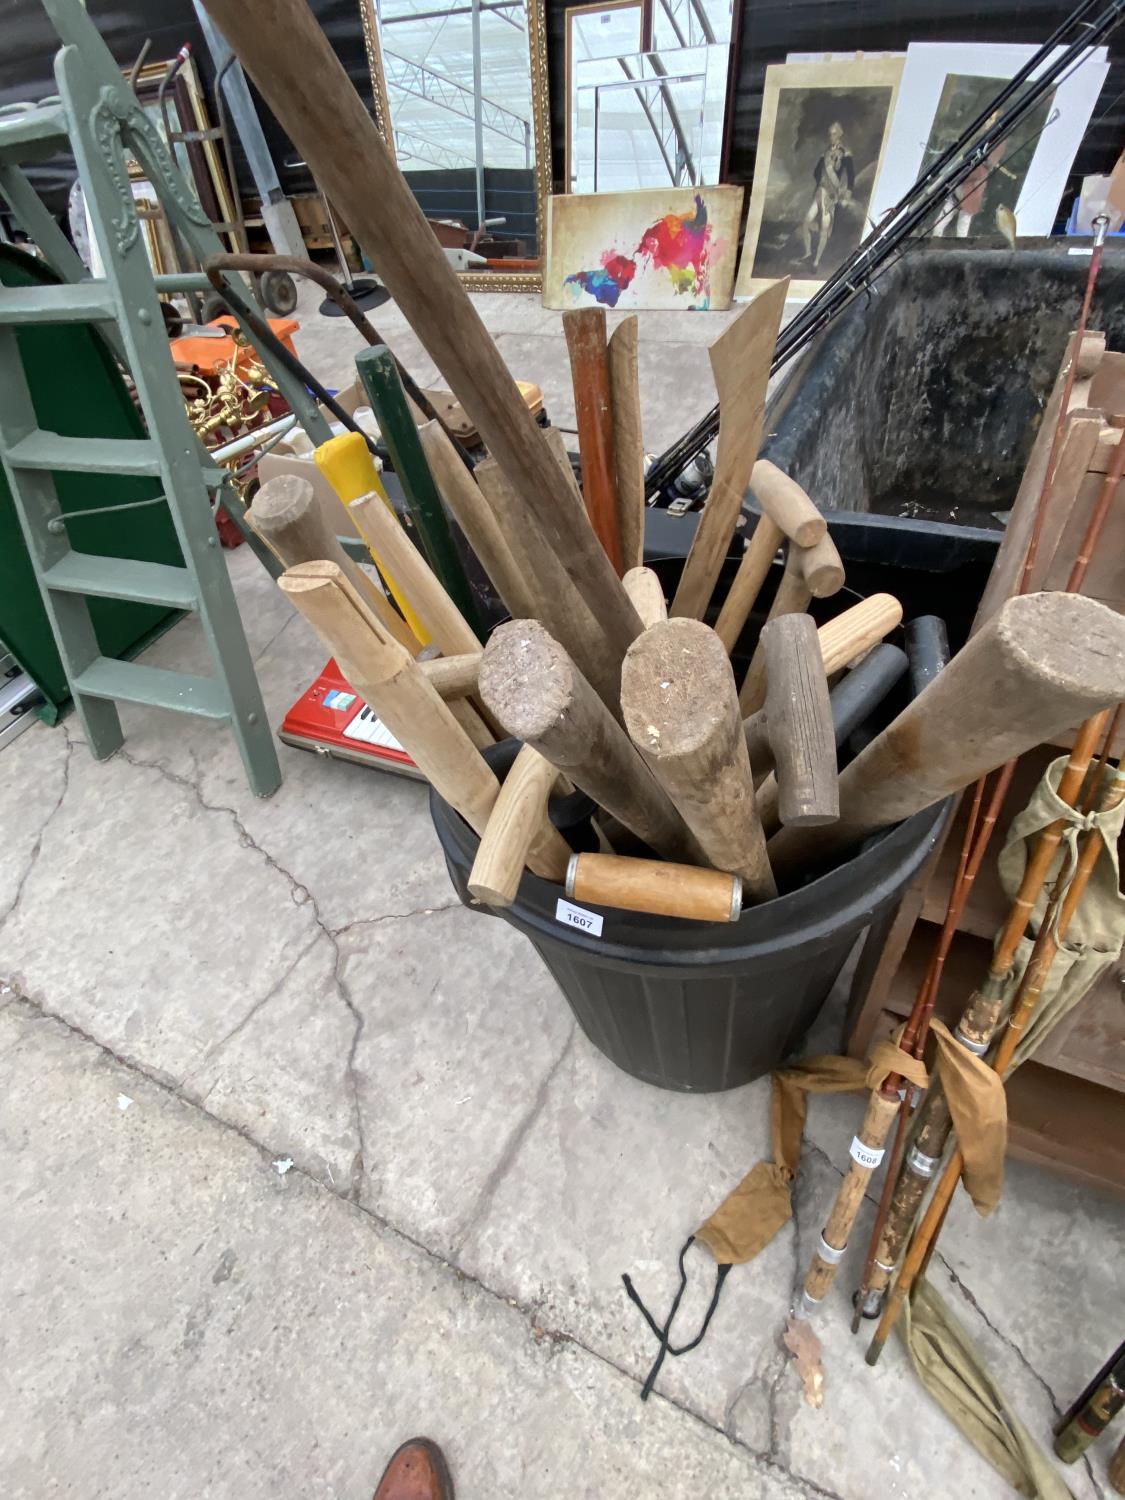 A LARGE QUANTITY OF NEW PICK AXE AND SLEDGE HAMMER HANDLES